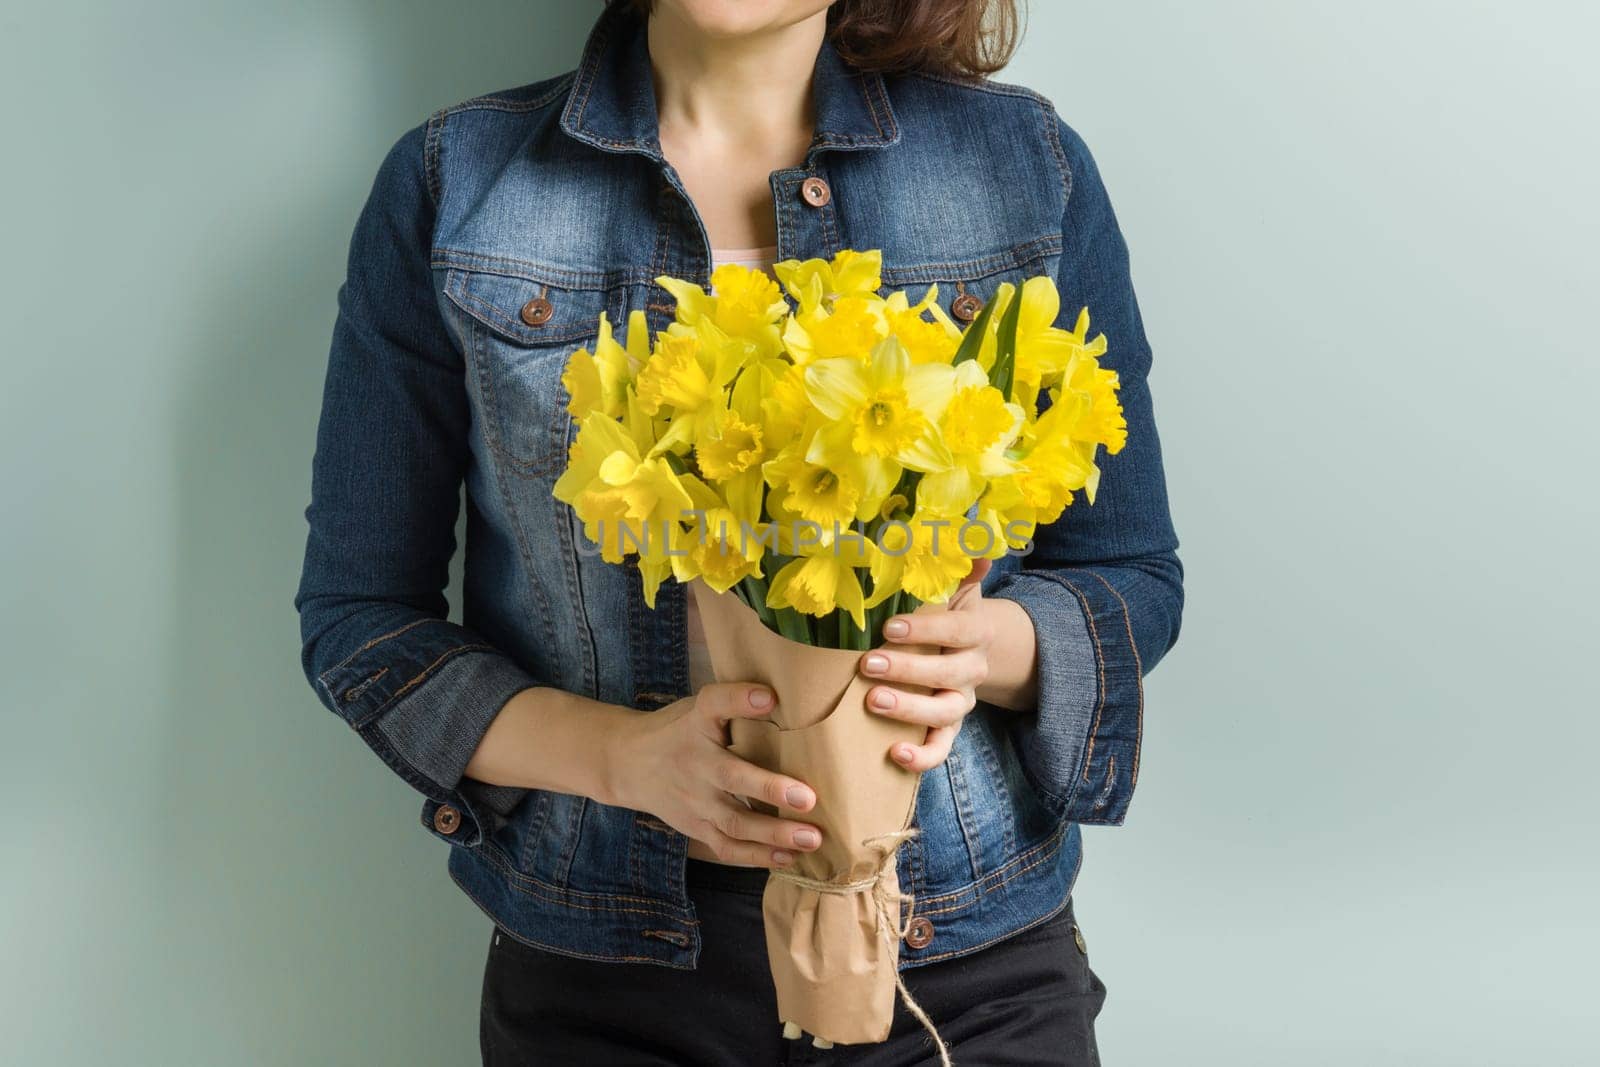 Bouquet of yellow flowers in hands of woman close-up, spring flowers daffodils, pastel green mint wall background